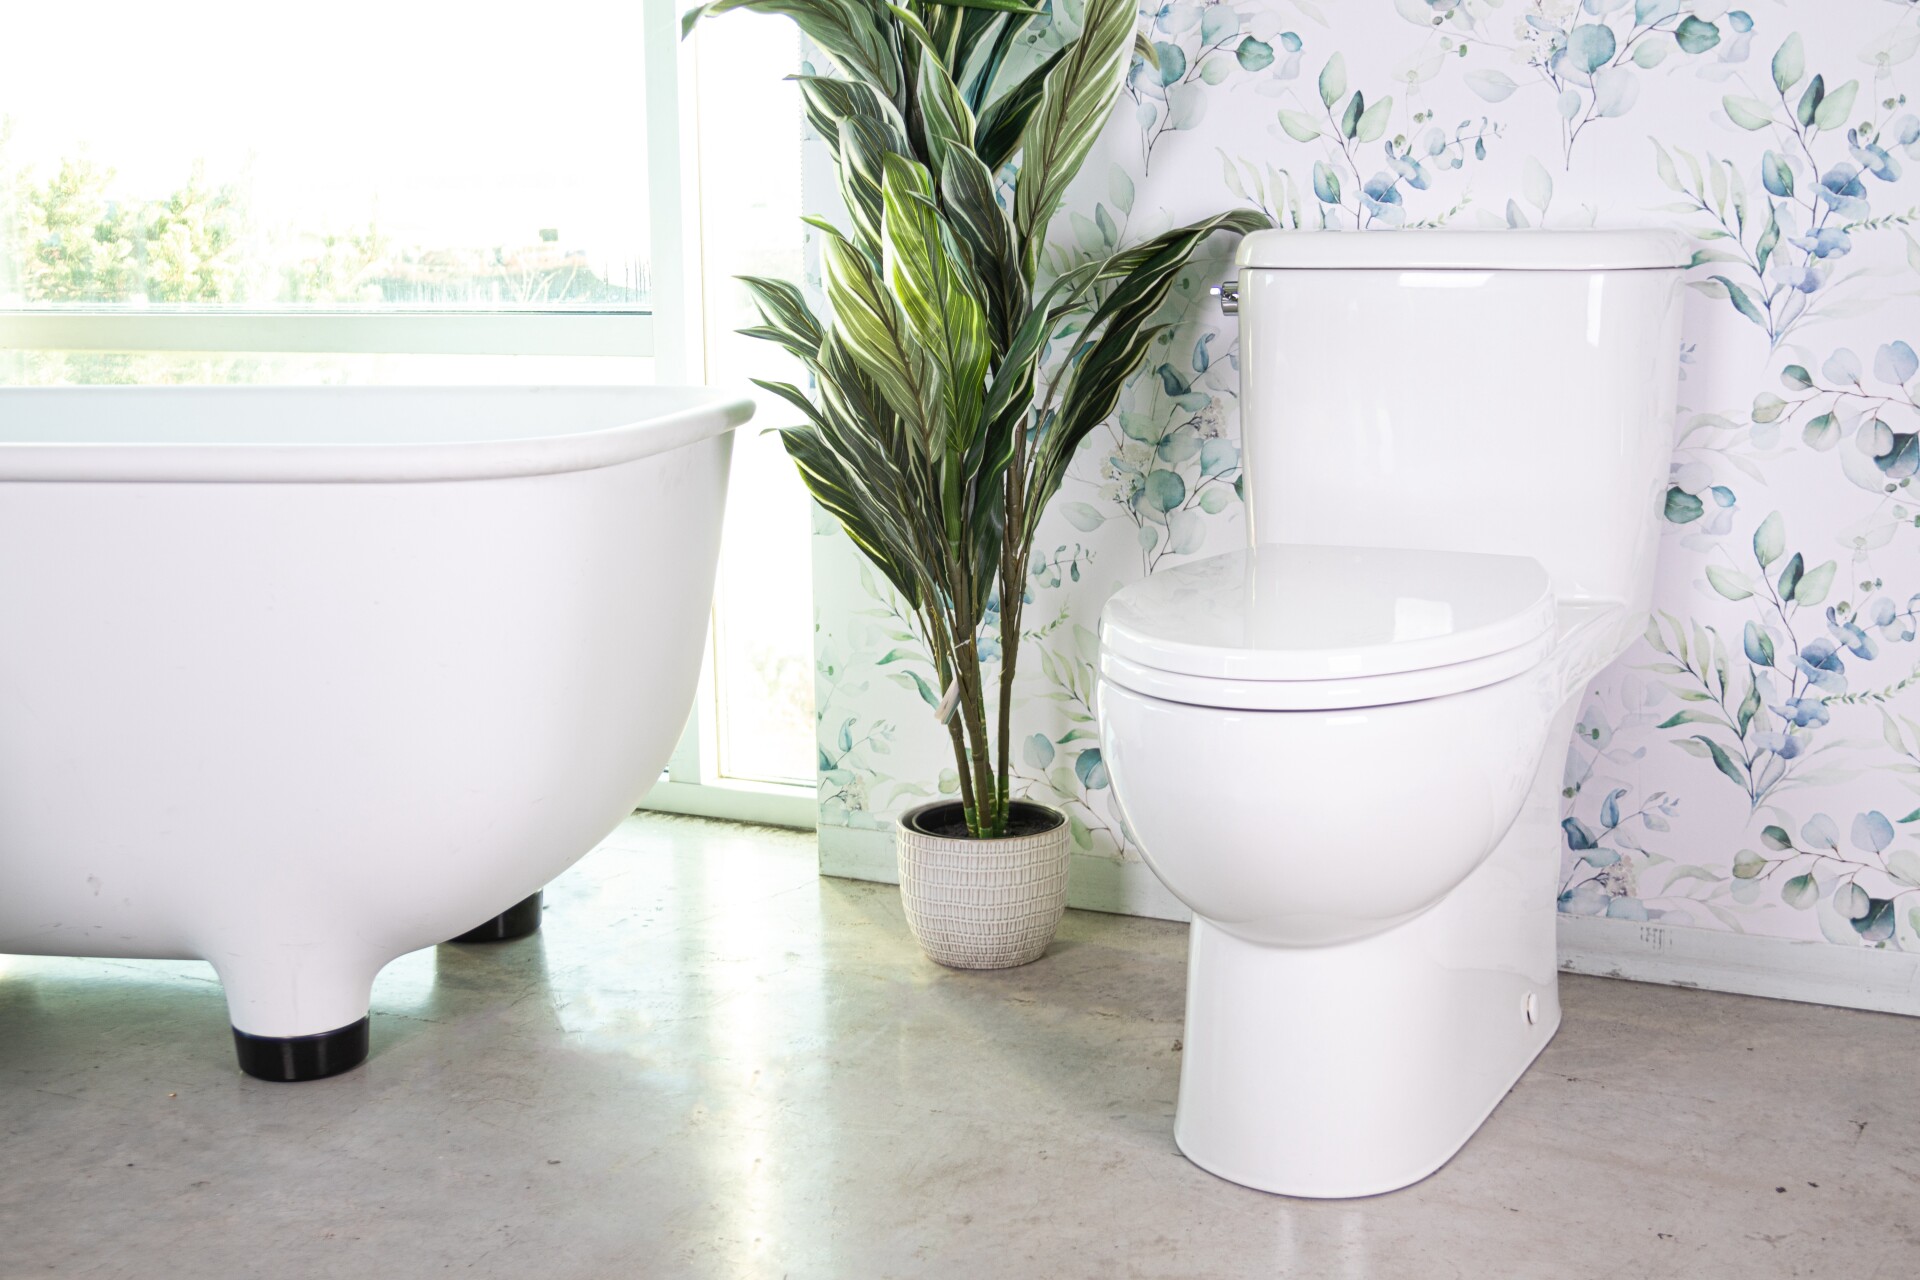 Wholesale toilet flush kits For Toilets In The Home Or Office 